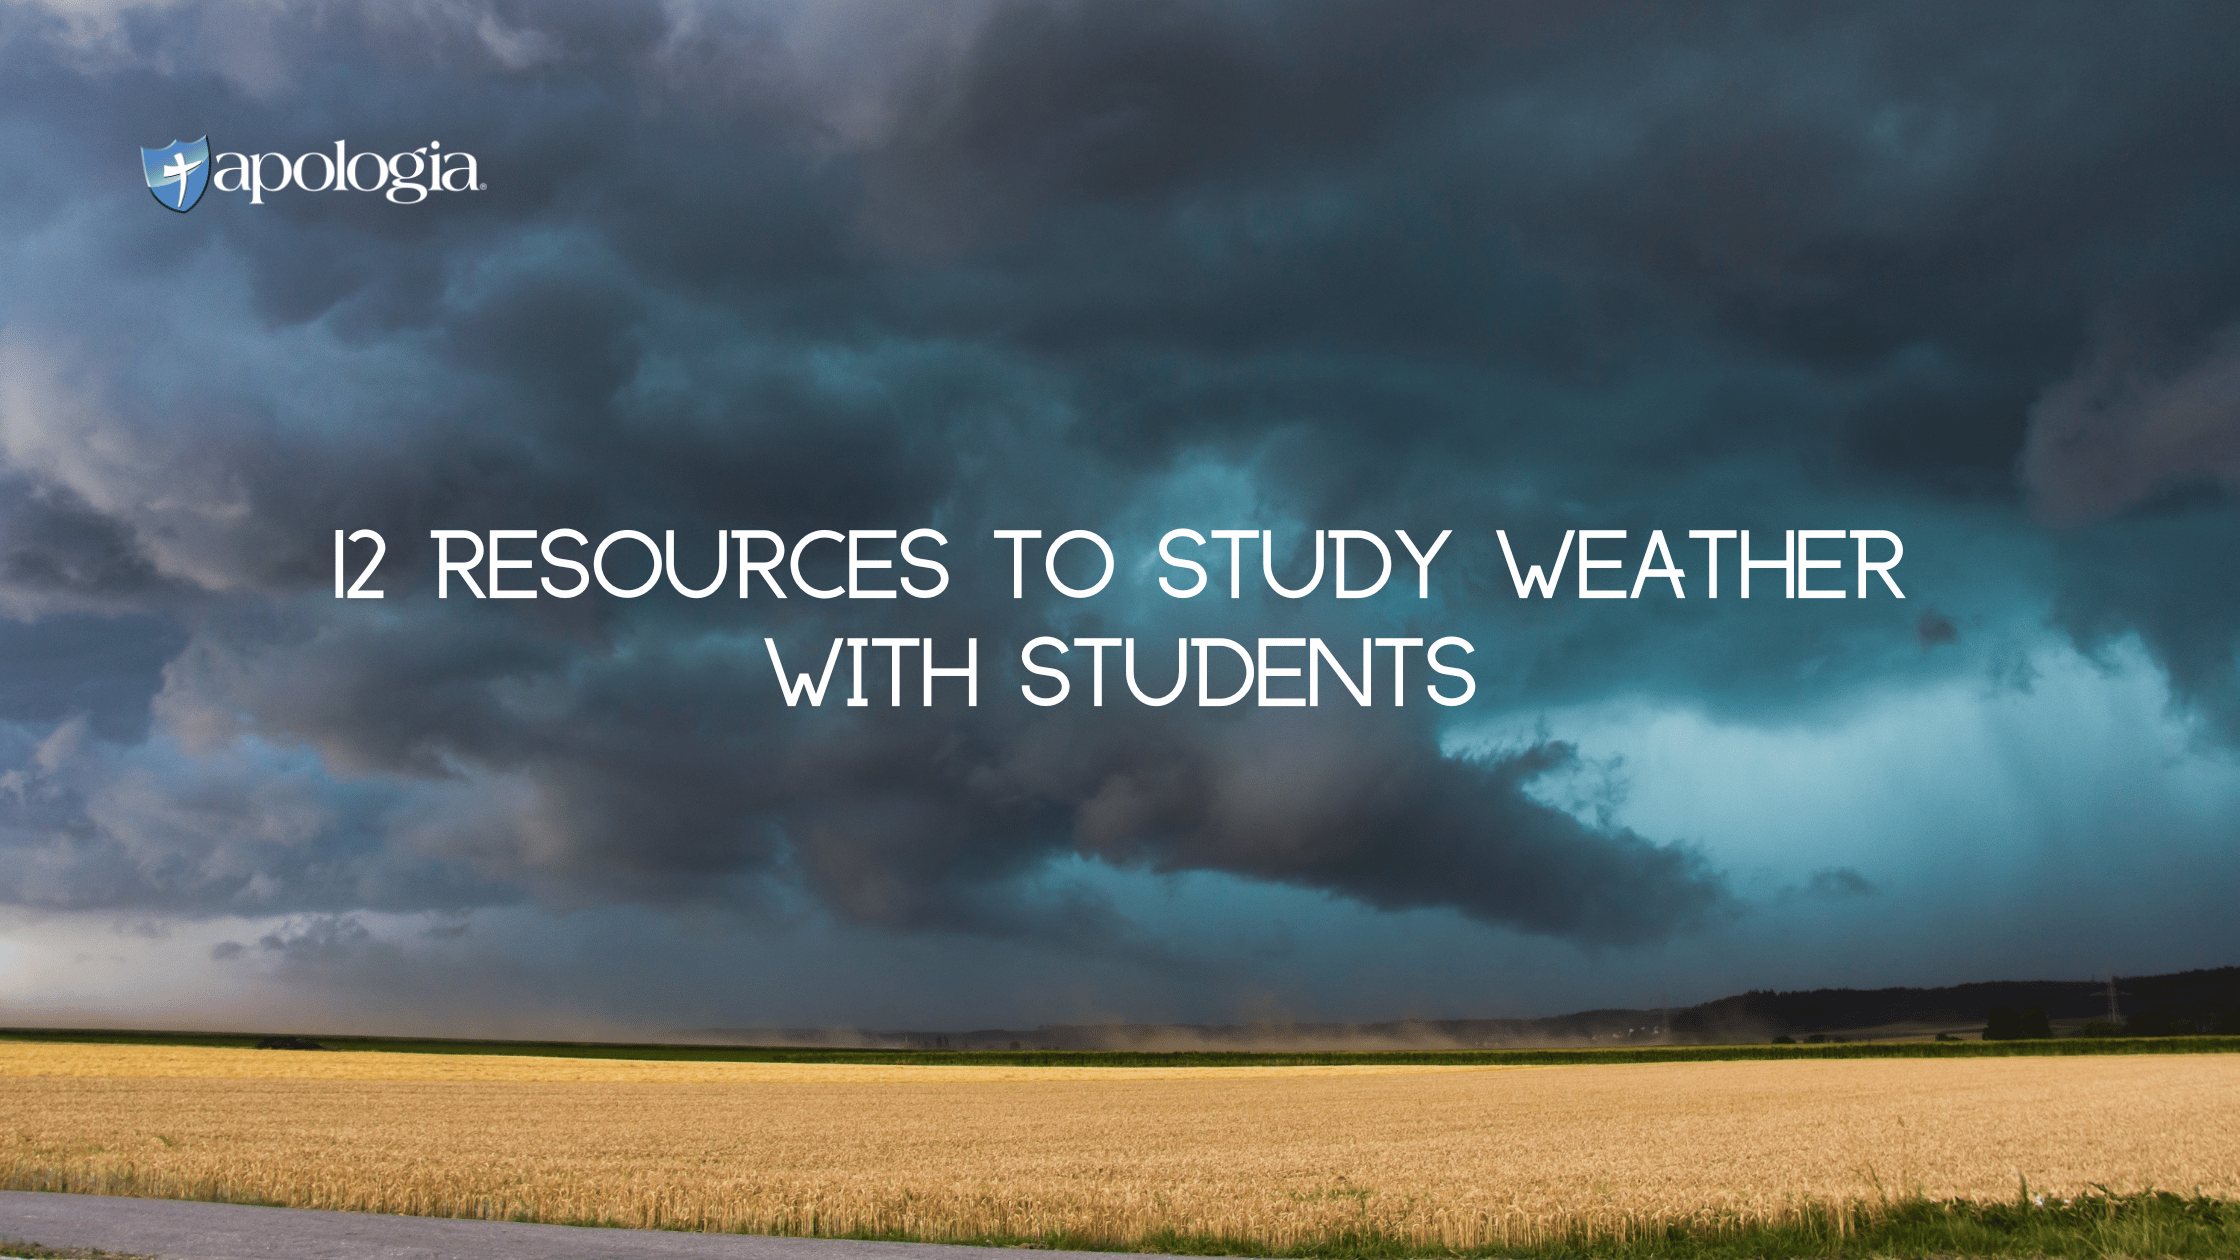 12 Resources to Study Weather with Students